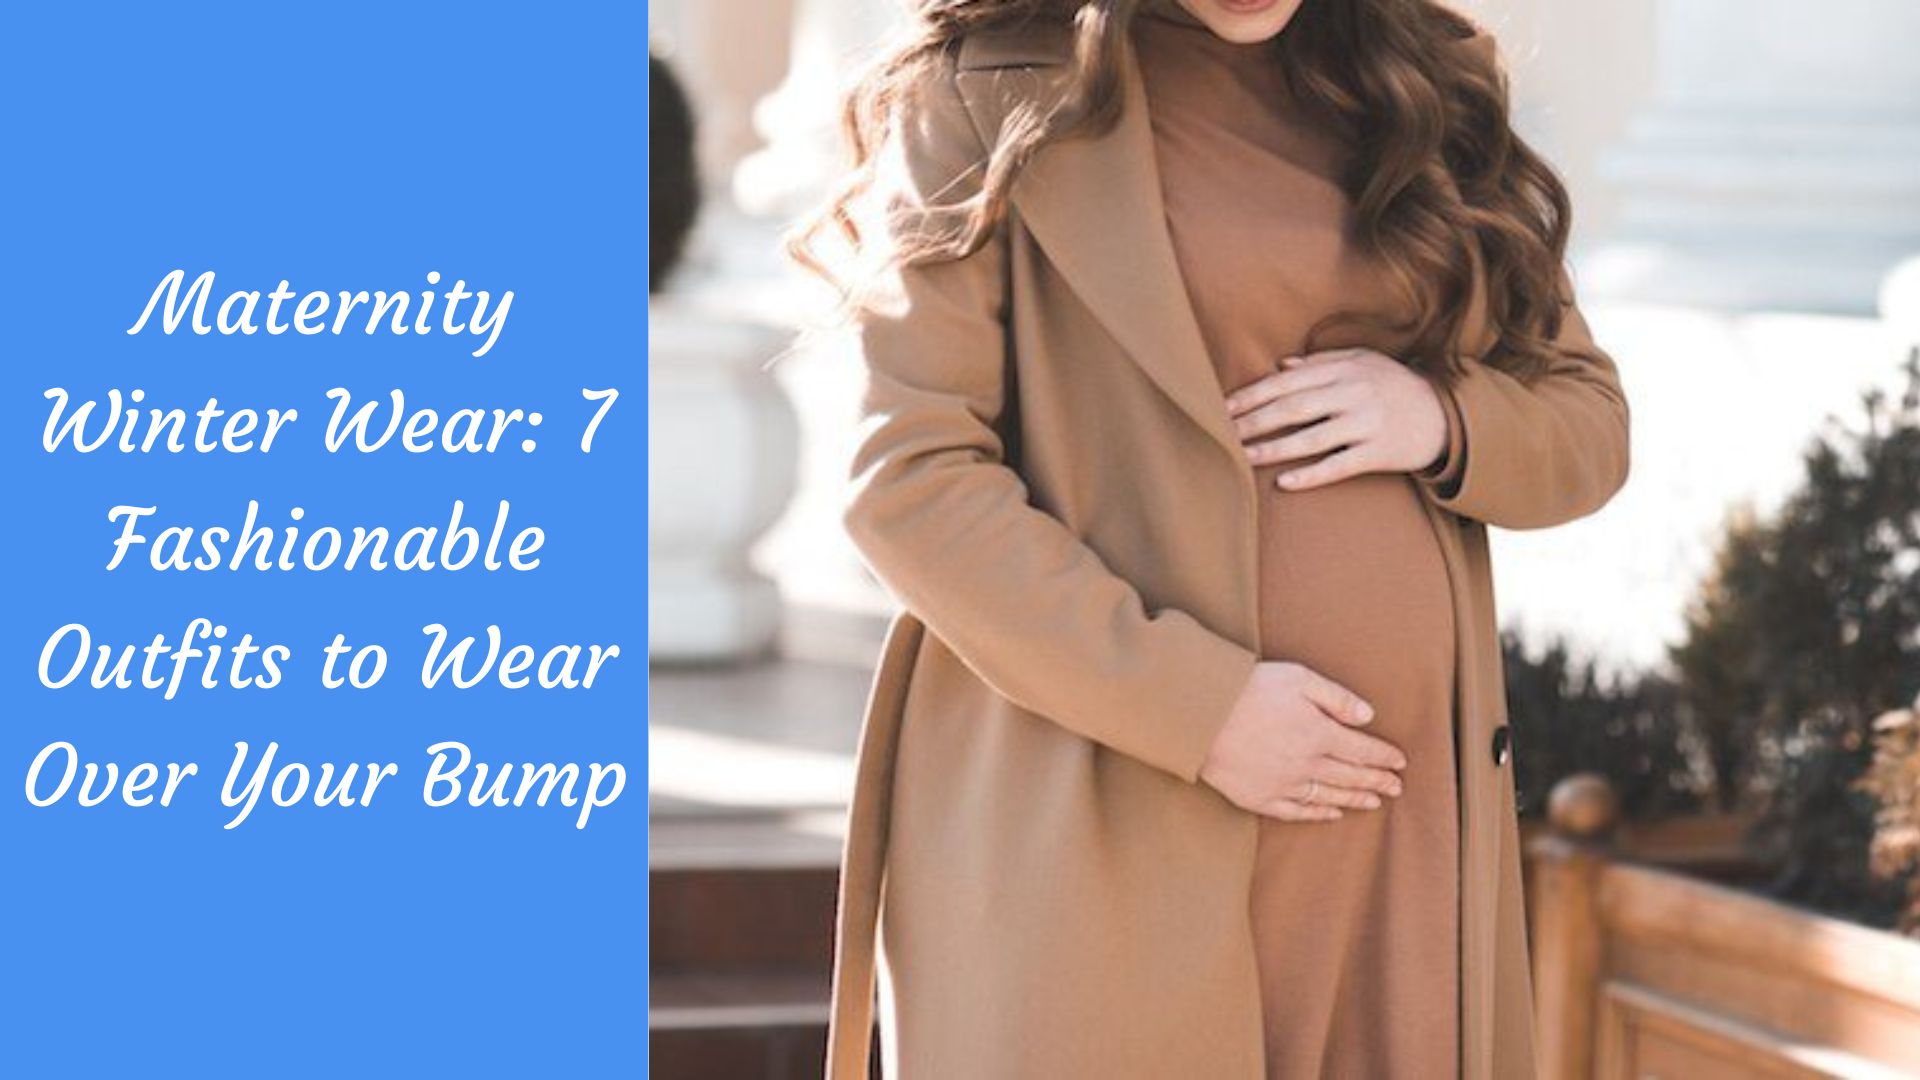 Maternity Winter Wear: 7 Fashionable Outfits to Wear Over Your